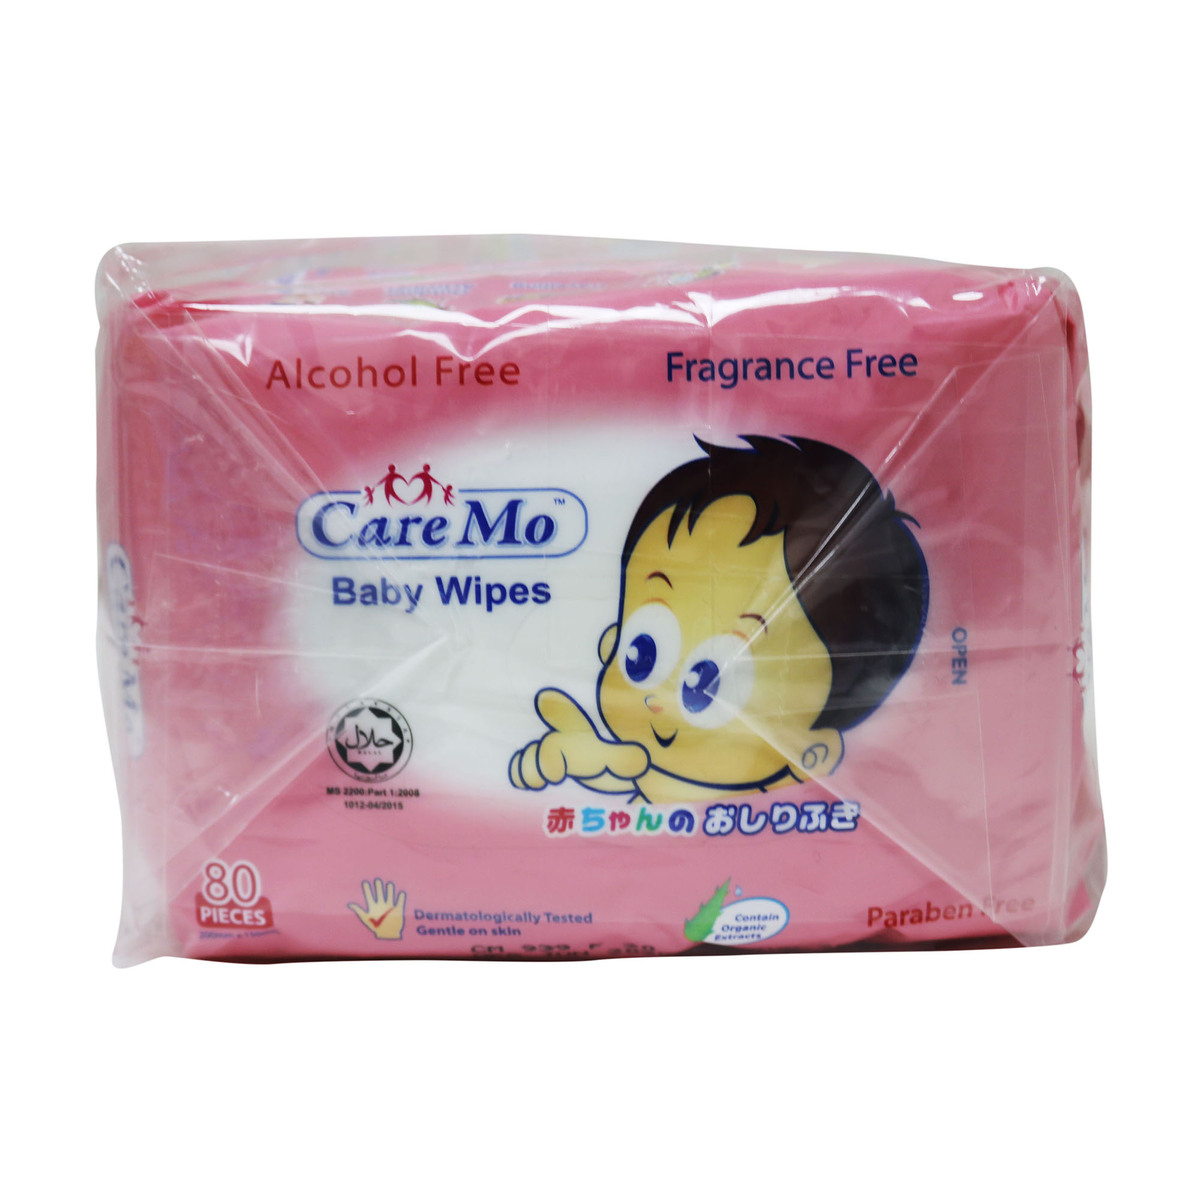 Caremo Baby Wipes Frgrance Free 3 x 80 Counts